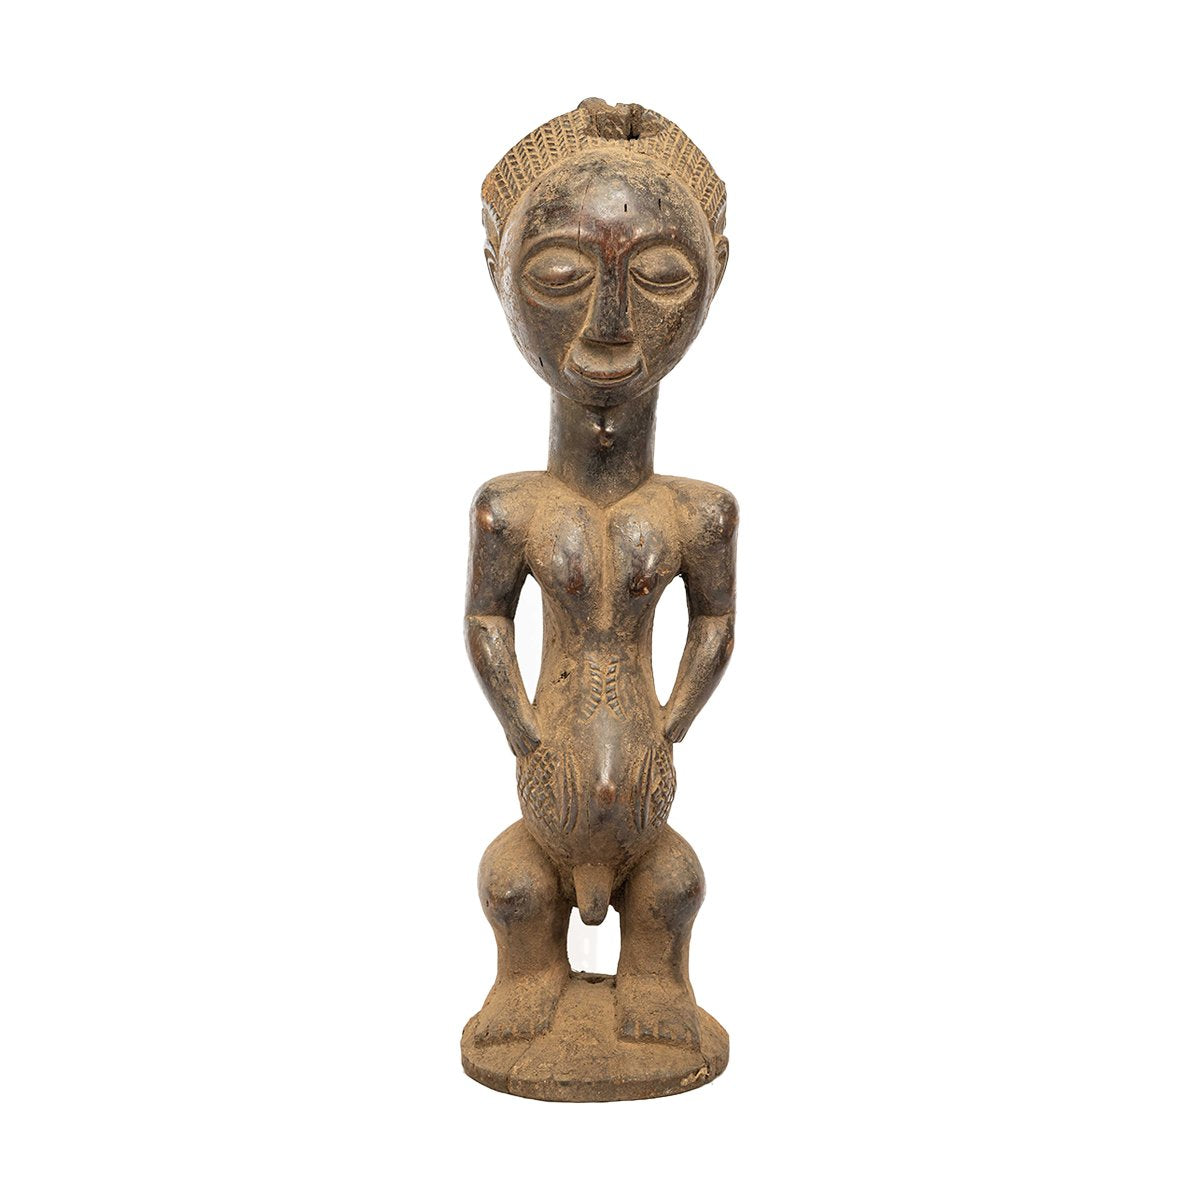 Luba Hemba idol - Authentic African handicrafts | Clothing, bags, painting, toys & more - CULTURE HUB by Muthoni Unchained